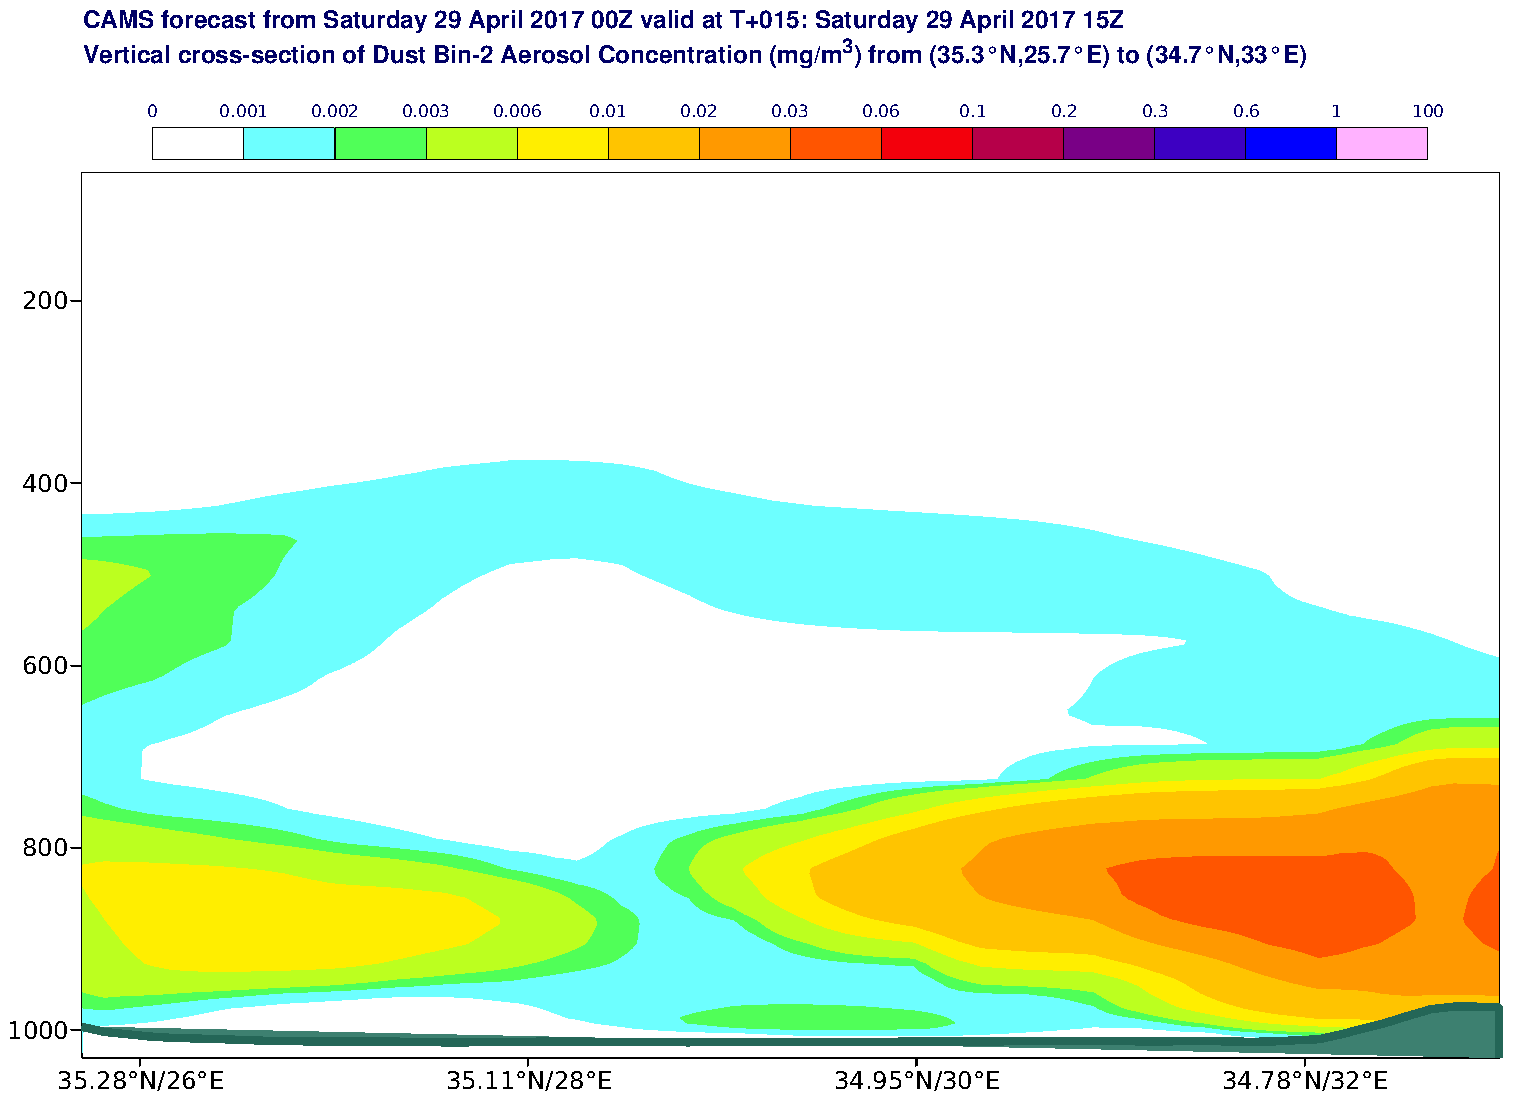 Vertical cross-section of Dust Bin-2 Aerosol Concentration (mg/m3) valid at T15 - 2017-04-29 15:00